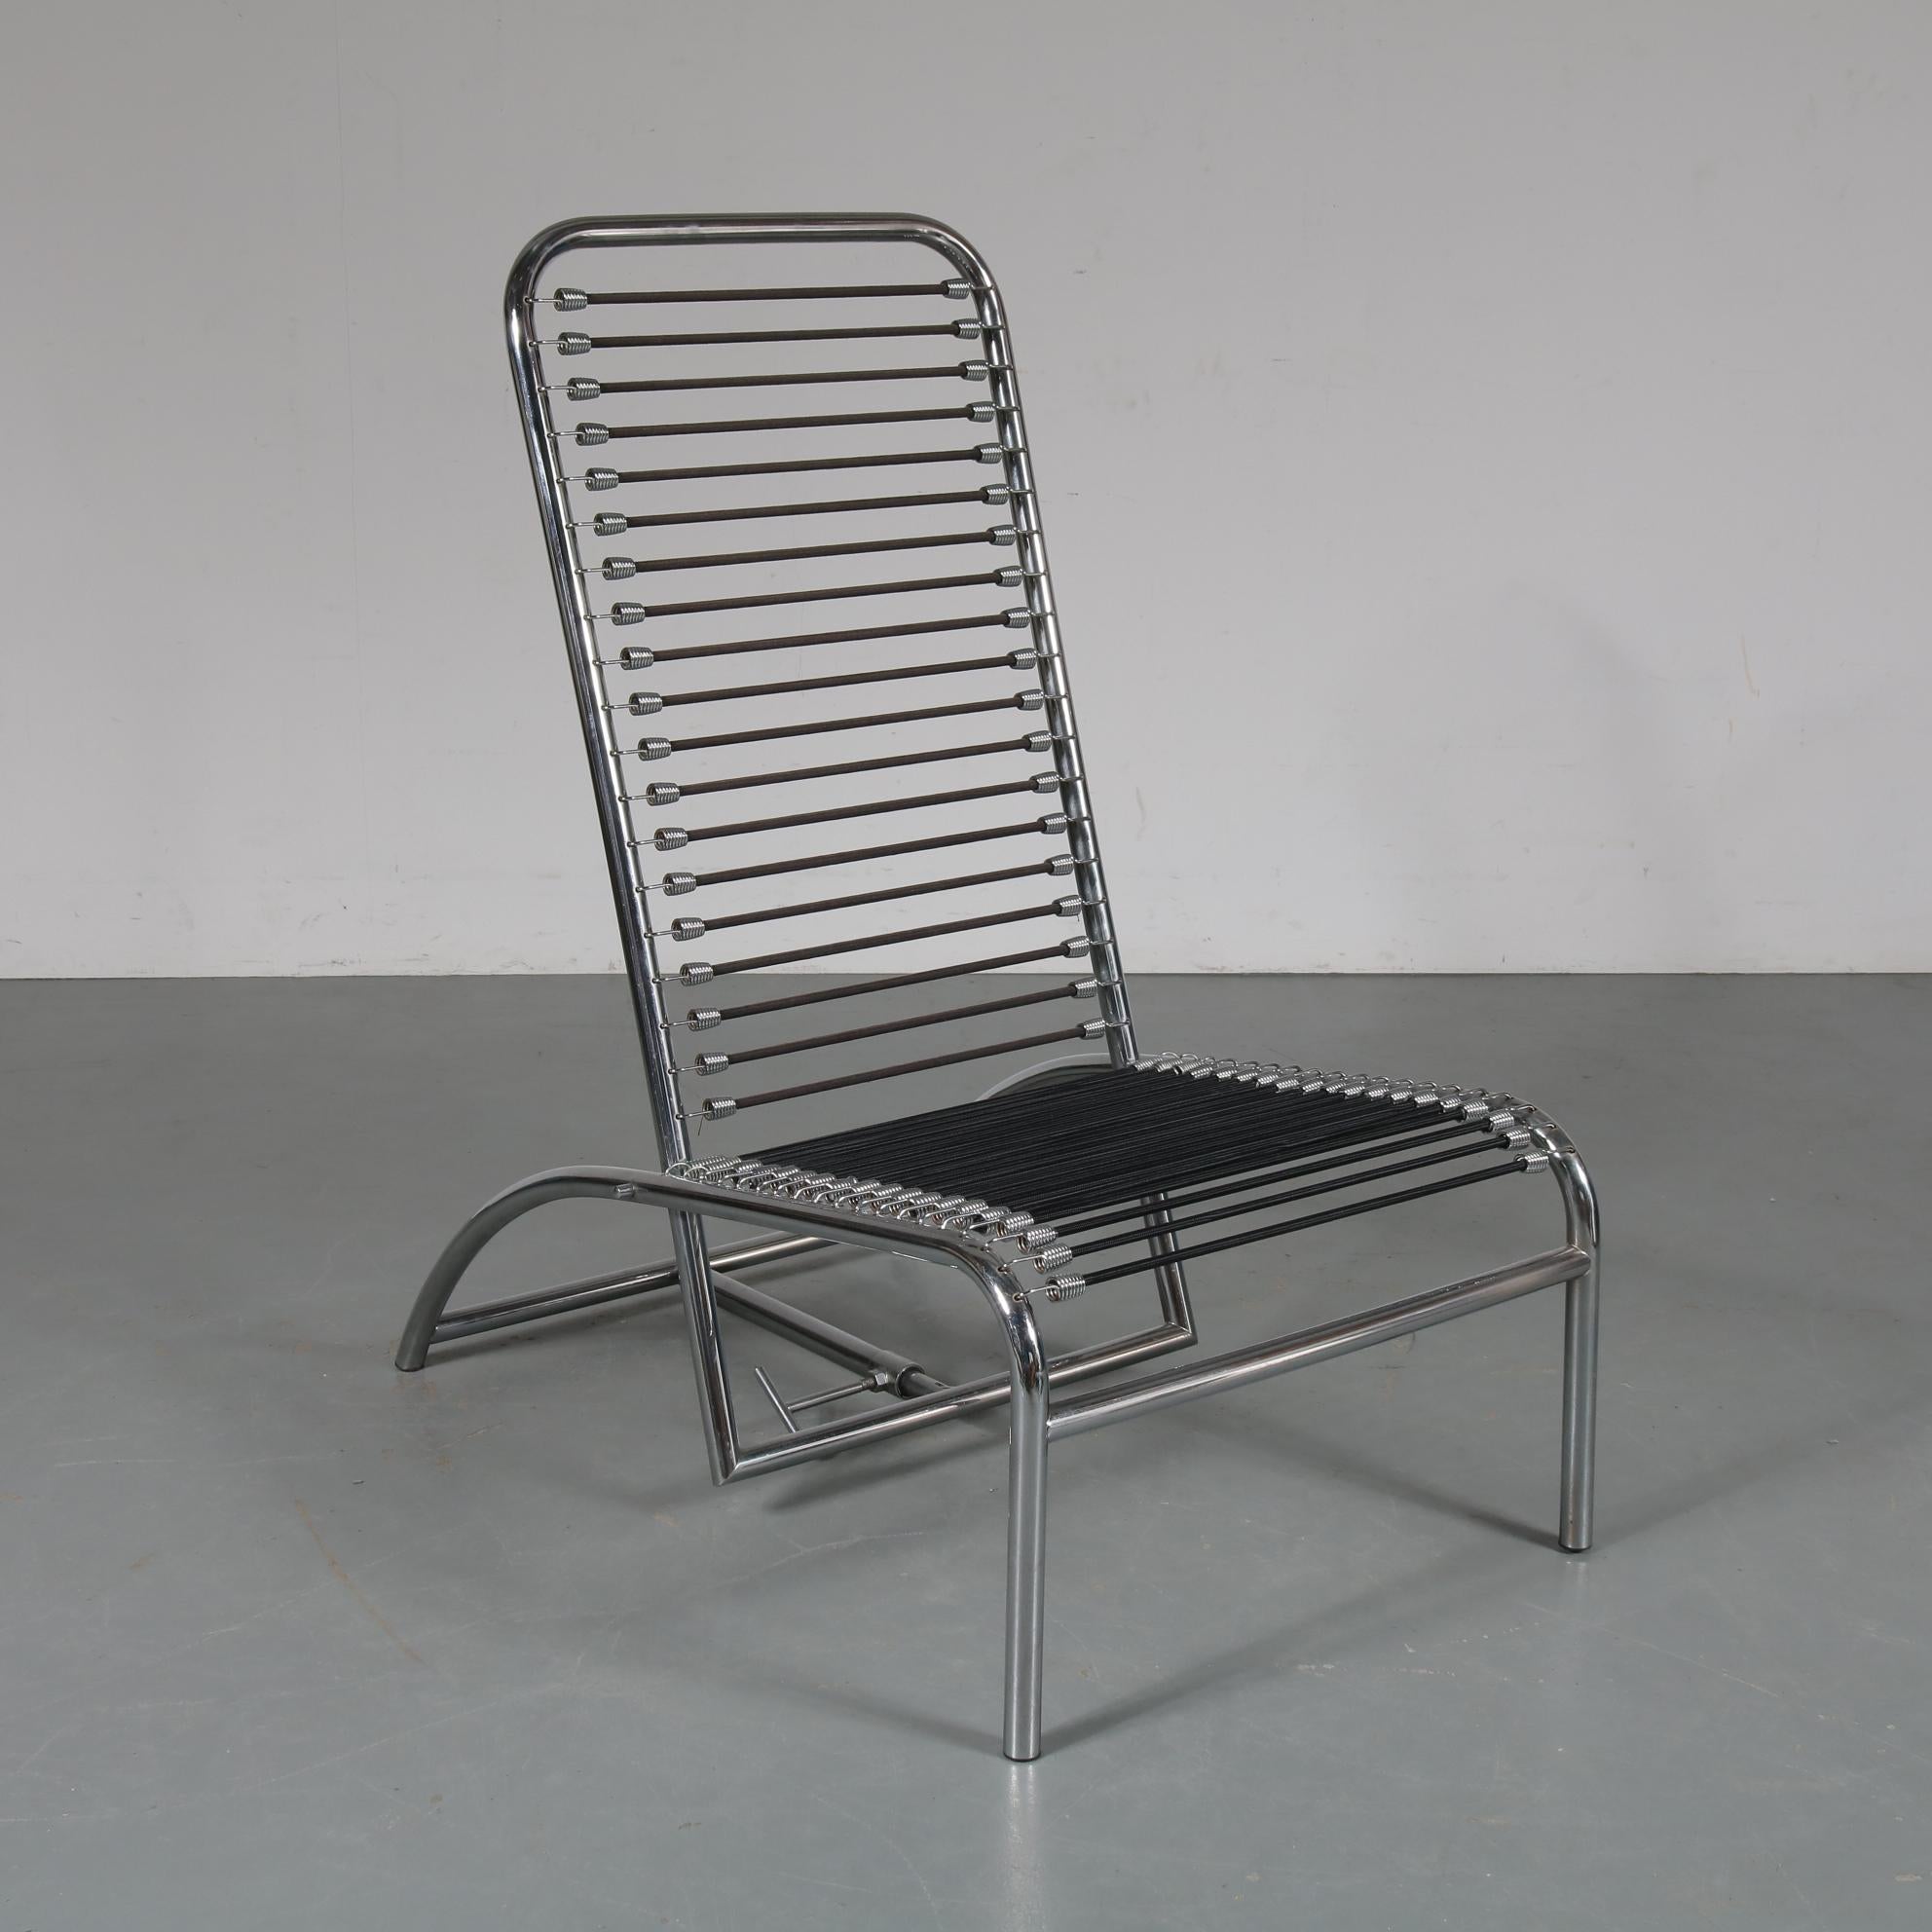 A beautiful chaise longue designed by René Herbst, manufactured by Tecta in Germany, circa 1980. It was originaly designed in 1930.

This eye-catching piece is made of high quality, chrome-plated tubular metal with a unique open structure and very